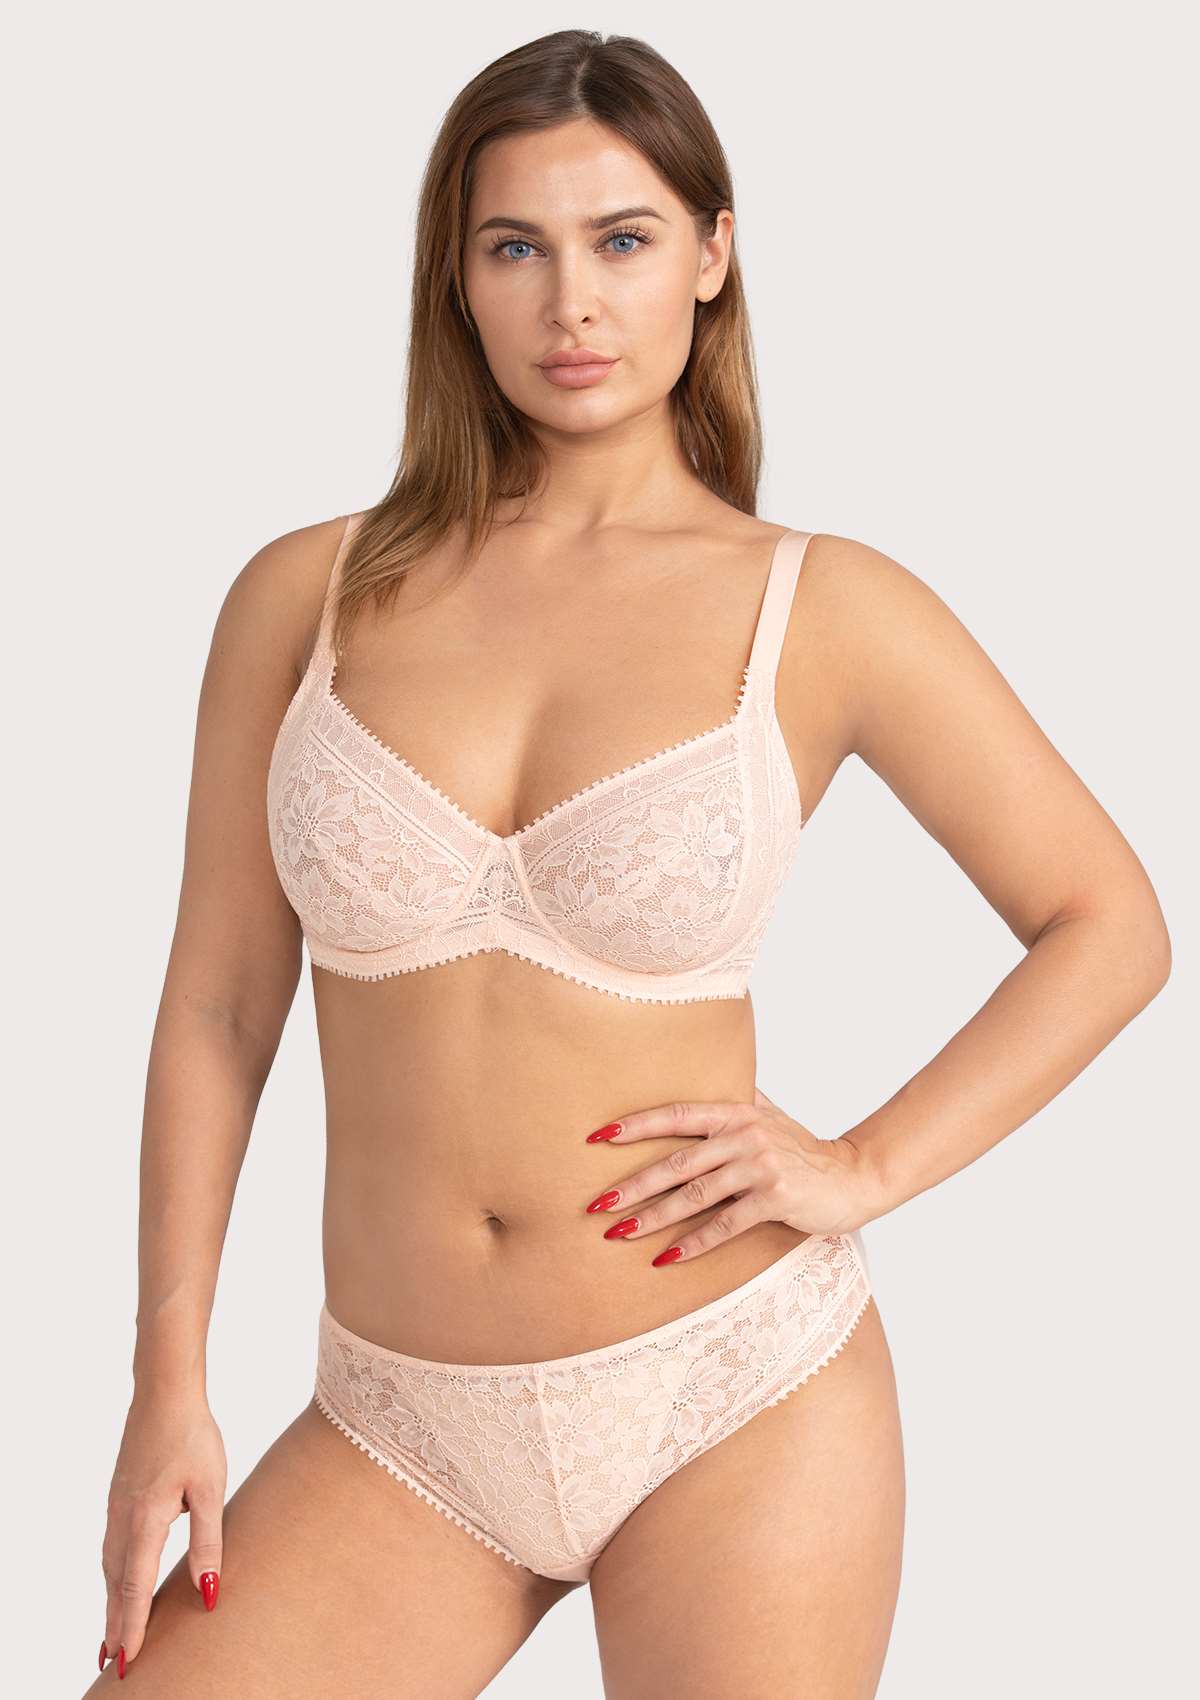 HSIA Silene Floral Delicate Unlined Lace Soft Cup Uplift Bra - Champagne / 34 / DD/E